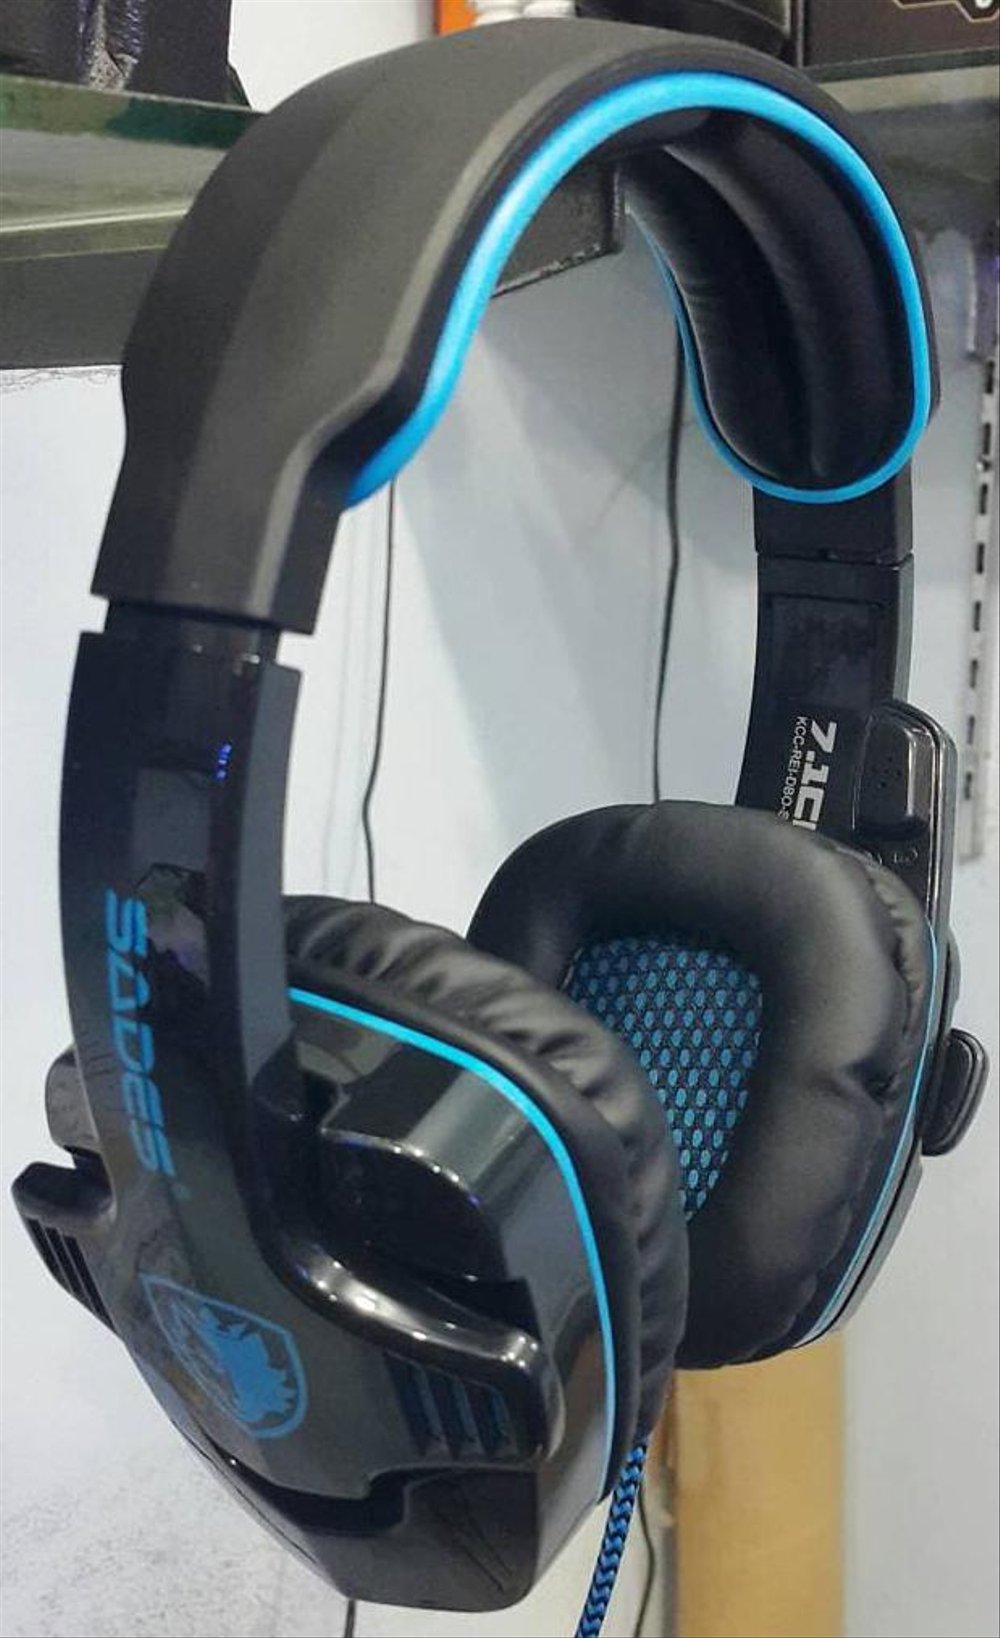 Sades 7.1 gaming headset does not support this platform